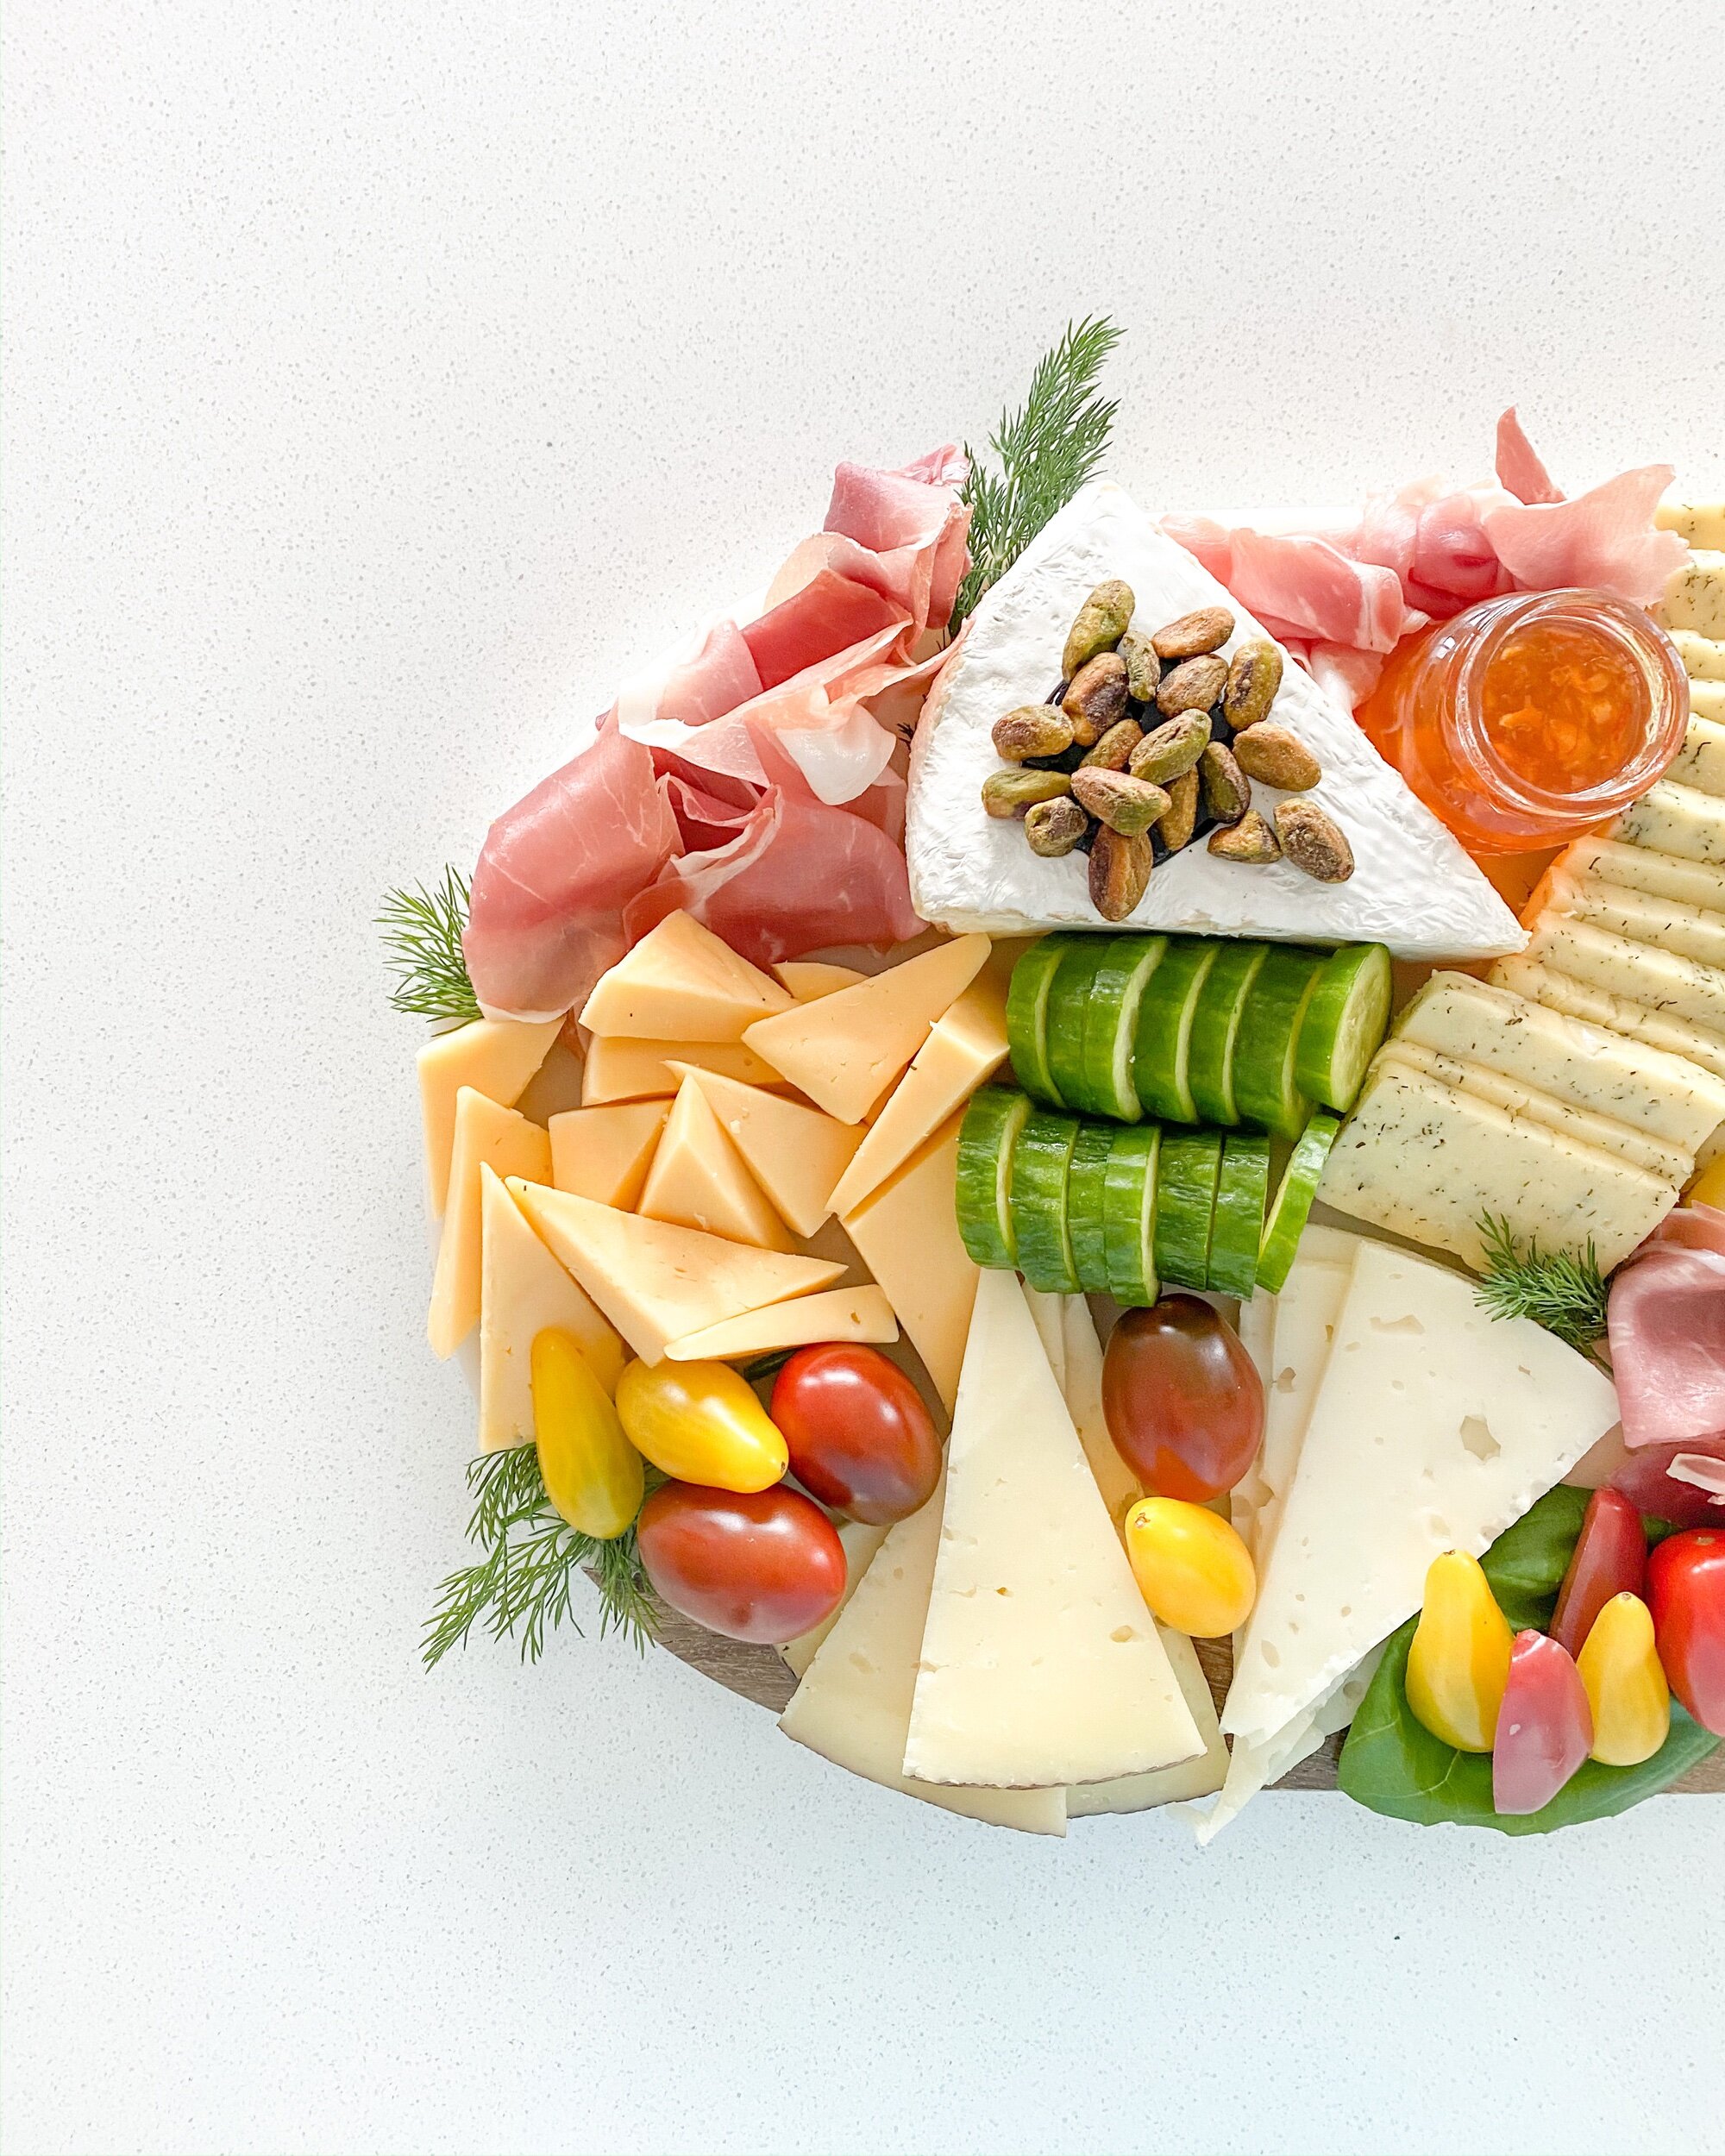 Www.tarynintotravel.com Spring Inspired Charcuterie Board Cheese board Fresh Veggies Easter Springtime Entertaining 